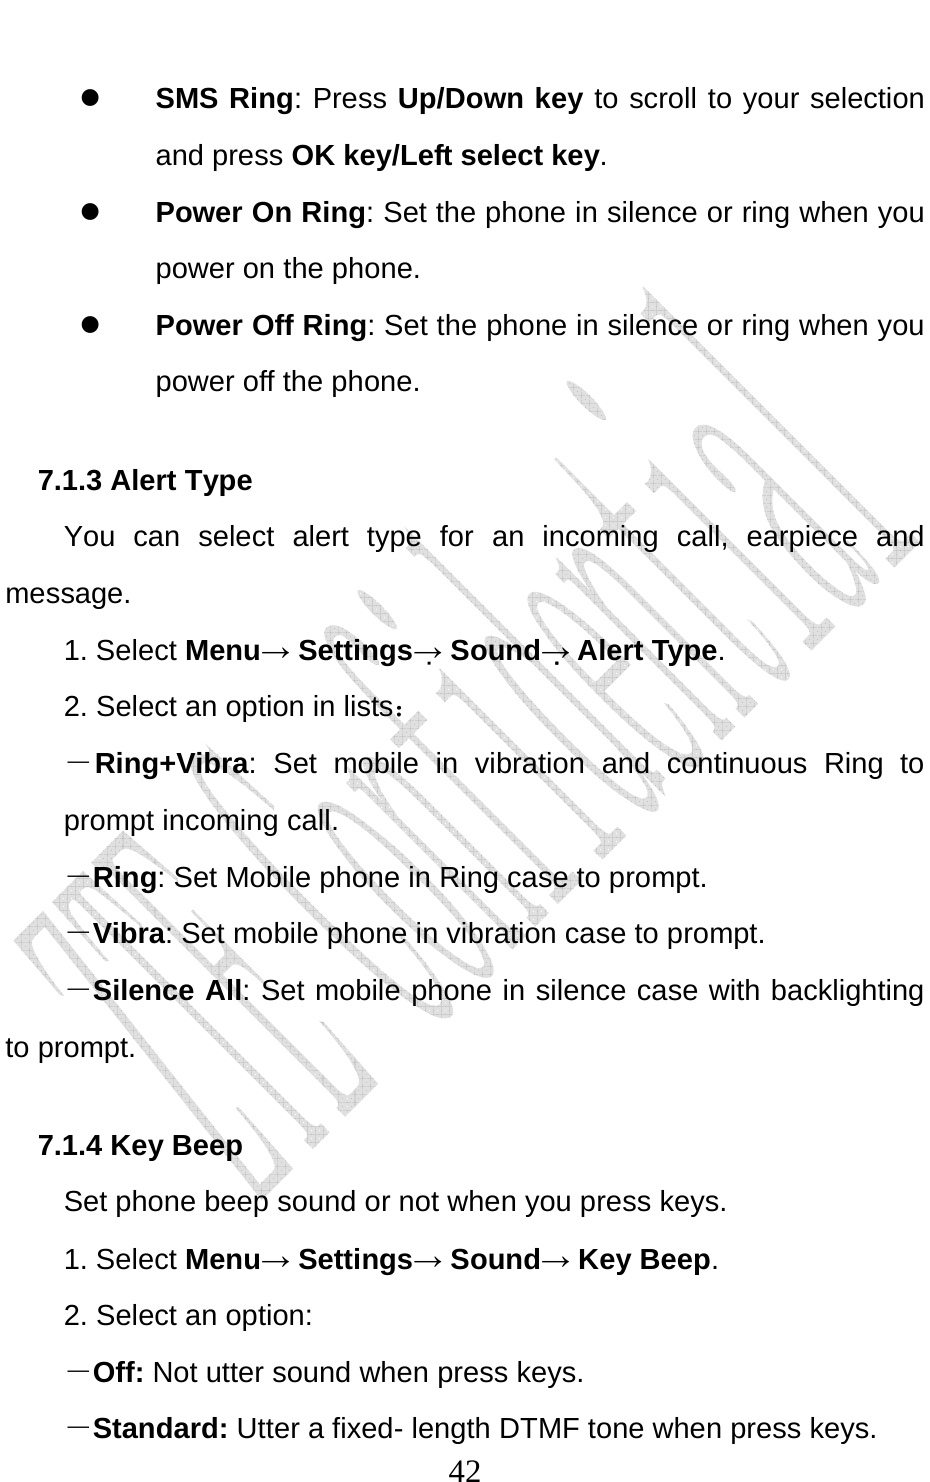                              42z SMS Ring: Press Up/Down key to scroll to your selection and press OK key/Left select key. z Power On Ring: Set the phone in silence or ring when you power on the phone. z Power Off Ring: Set the phone in silence or ring when you power off the phone.   7.1.3 Alert Type You can select alert type for an incoming call, earpiece and message. 1. Select Menu→ Settings→ Sound→ Alert Type. 2. Select an option in lists： －Ring+Vibra: Set mobile in vibration and continuous Ring to prompt incoming call.   －Ring: Set Mobile phone in Ring case to prompt. －Vibra: Set mobile phone in vibration case to prompt. －Silence All: Set mobile phone in silence case with backlighting to prompt. 7.1.4 Key Beep Set phone beep sound or not when you press keys.   1. Select Menu→ Settings→ Sound→ Key Beep. 2. Select an option: －Off: Not utter sound when press keys. －Standard: Utter a fixed- length DTMF tone when press keys. 